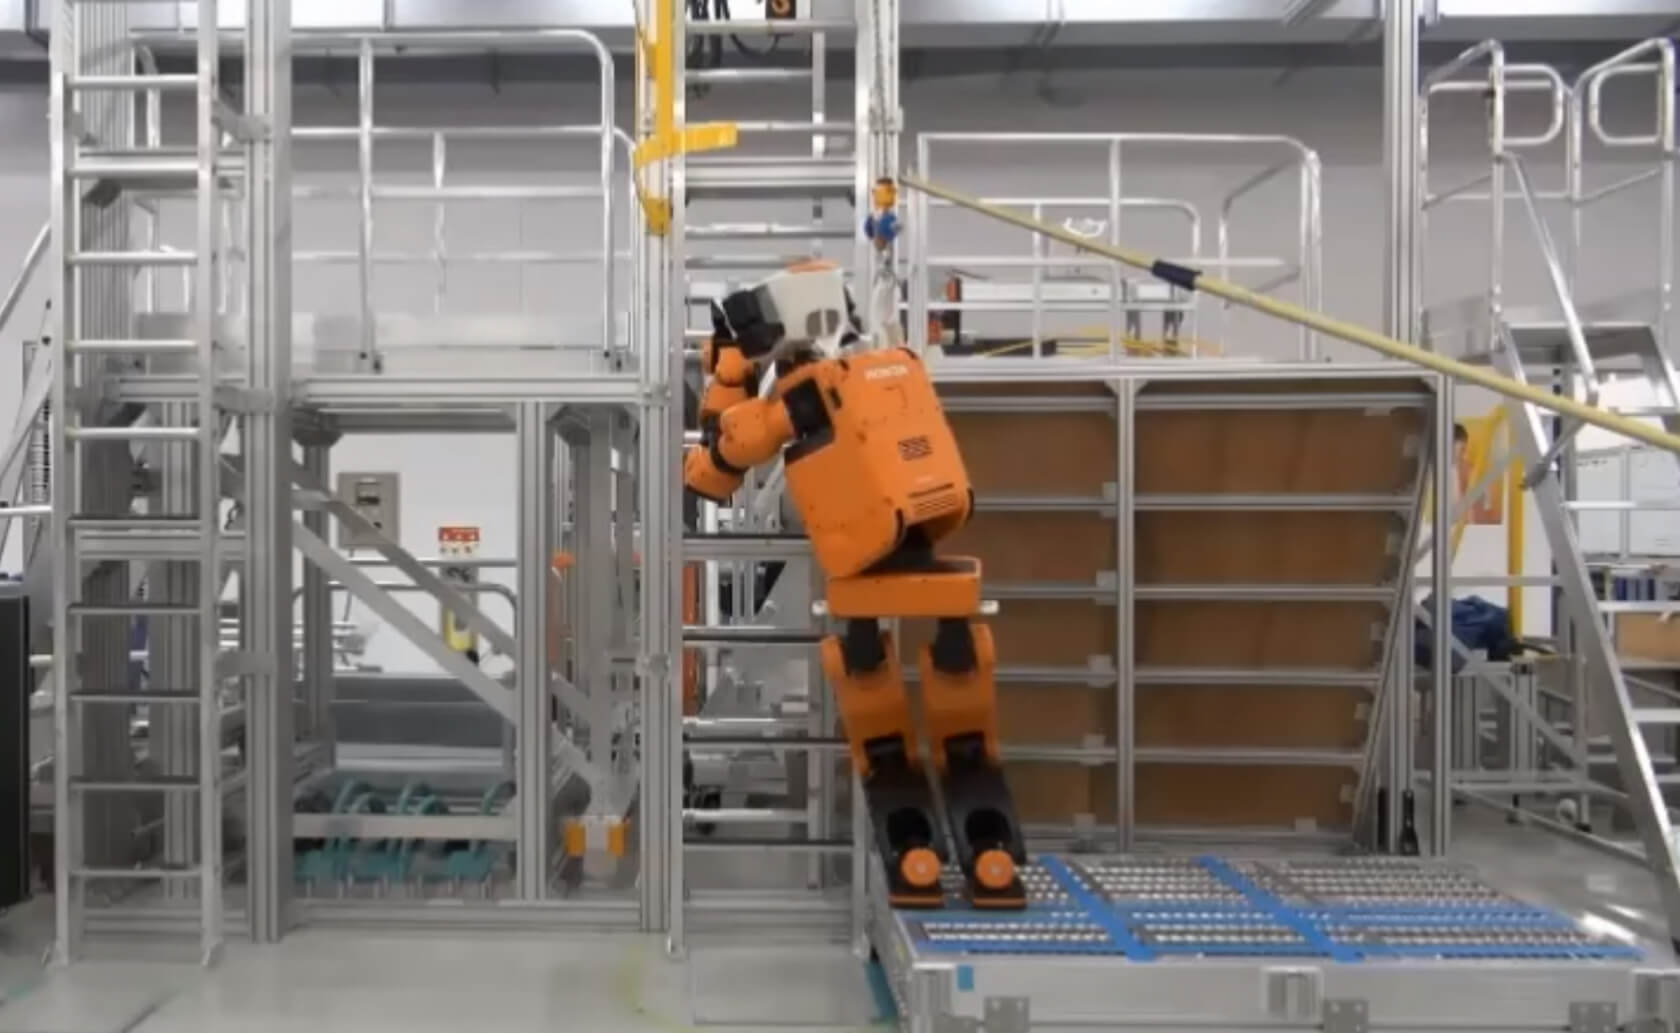 Honda shows off its disaster recovery robot